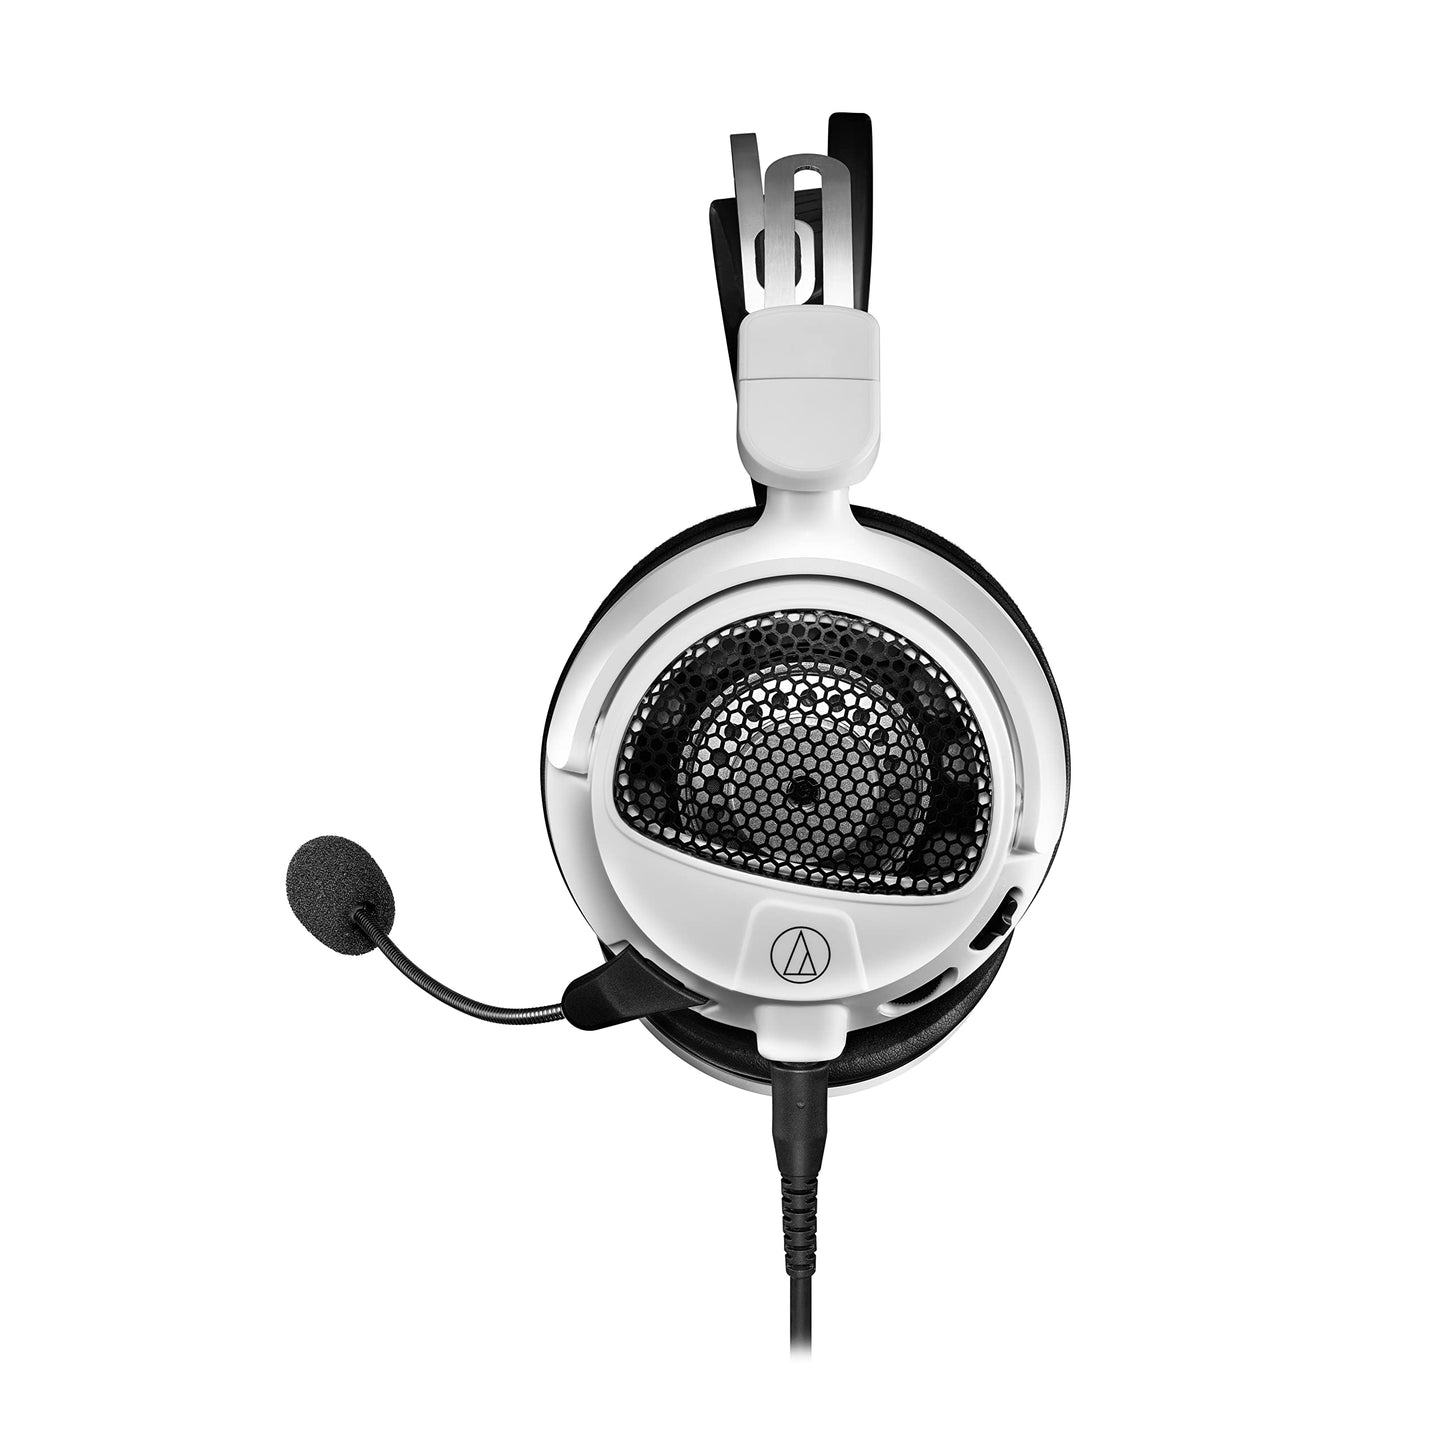 Audio-Technica ATH-GDL3WH Open-Back Gaming Headset, White